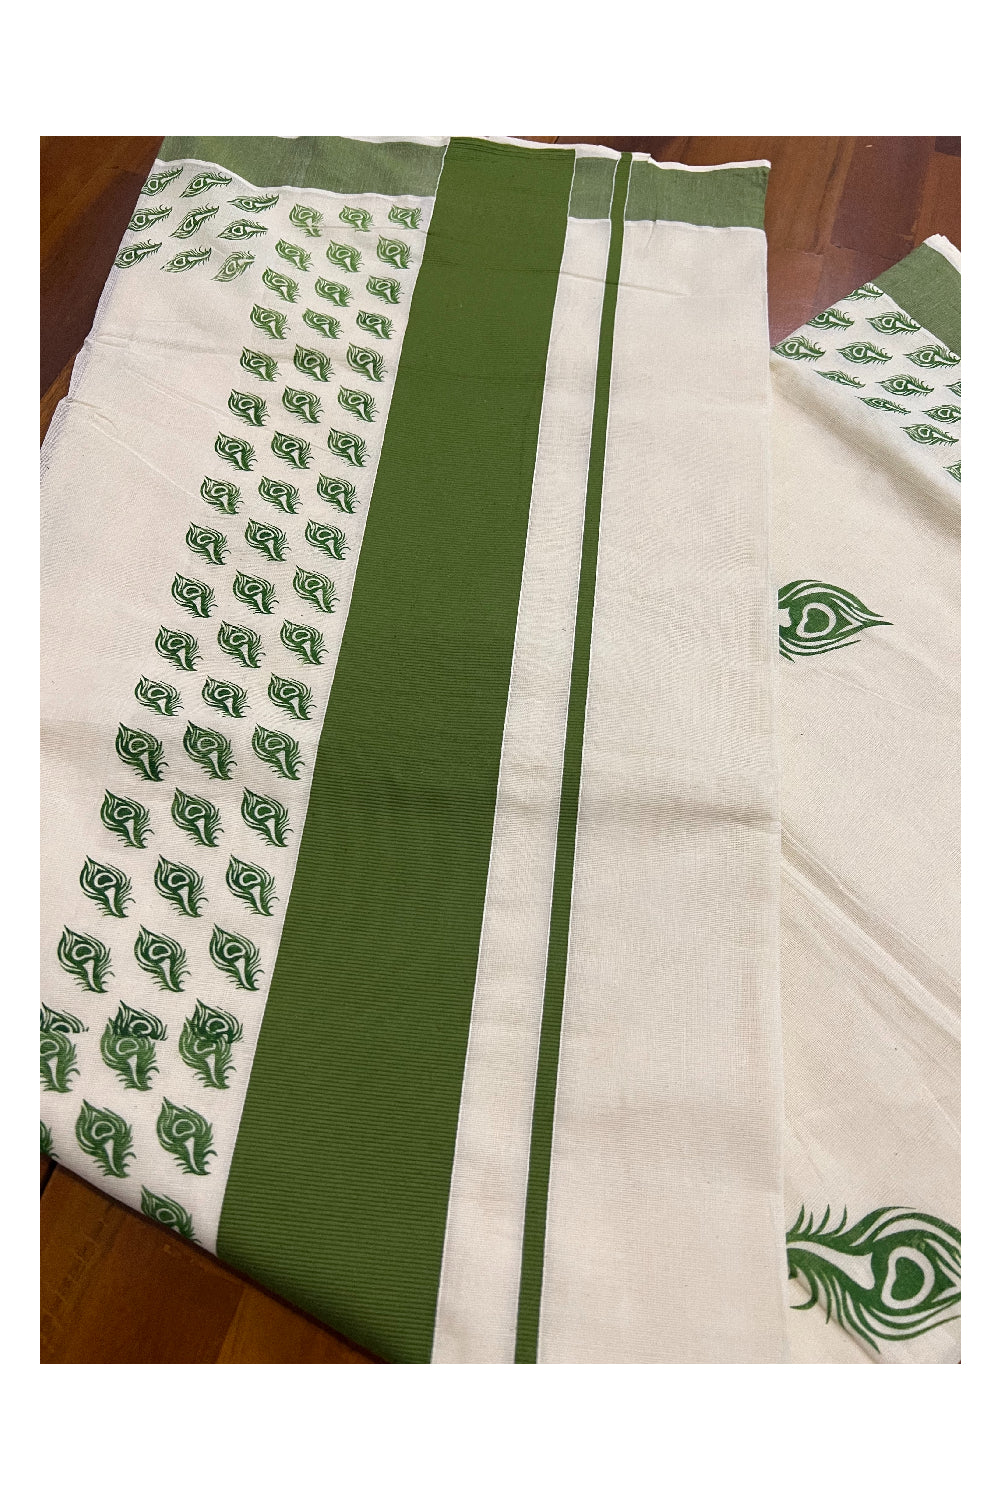 Pure Cotton Kerala Saree with Bottle Green Peacock Feather Block Printed Border